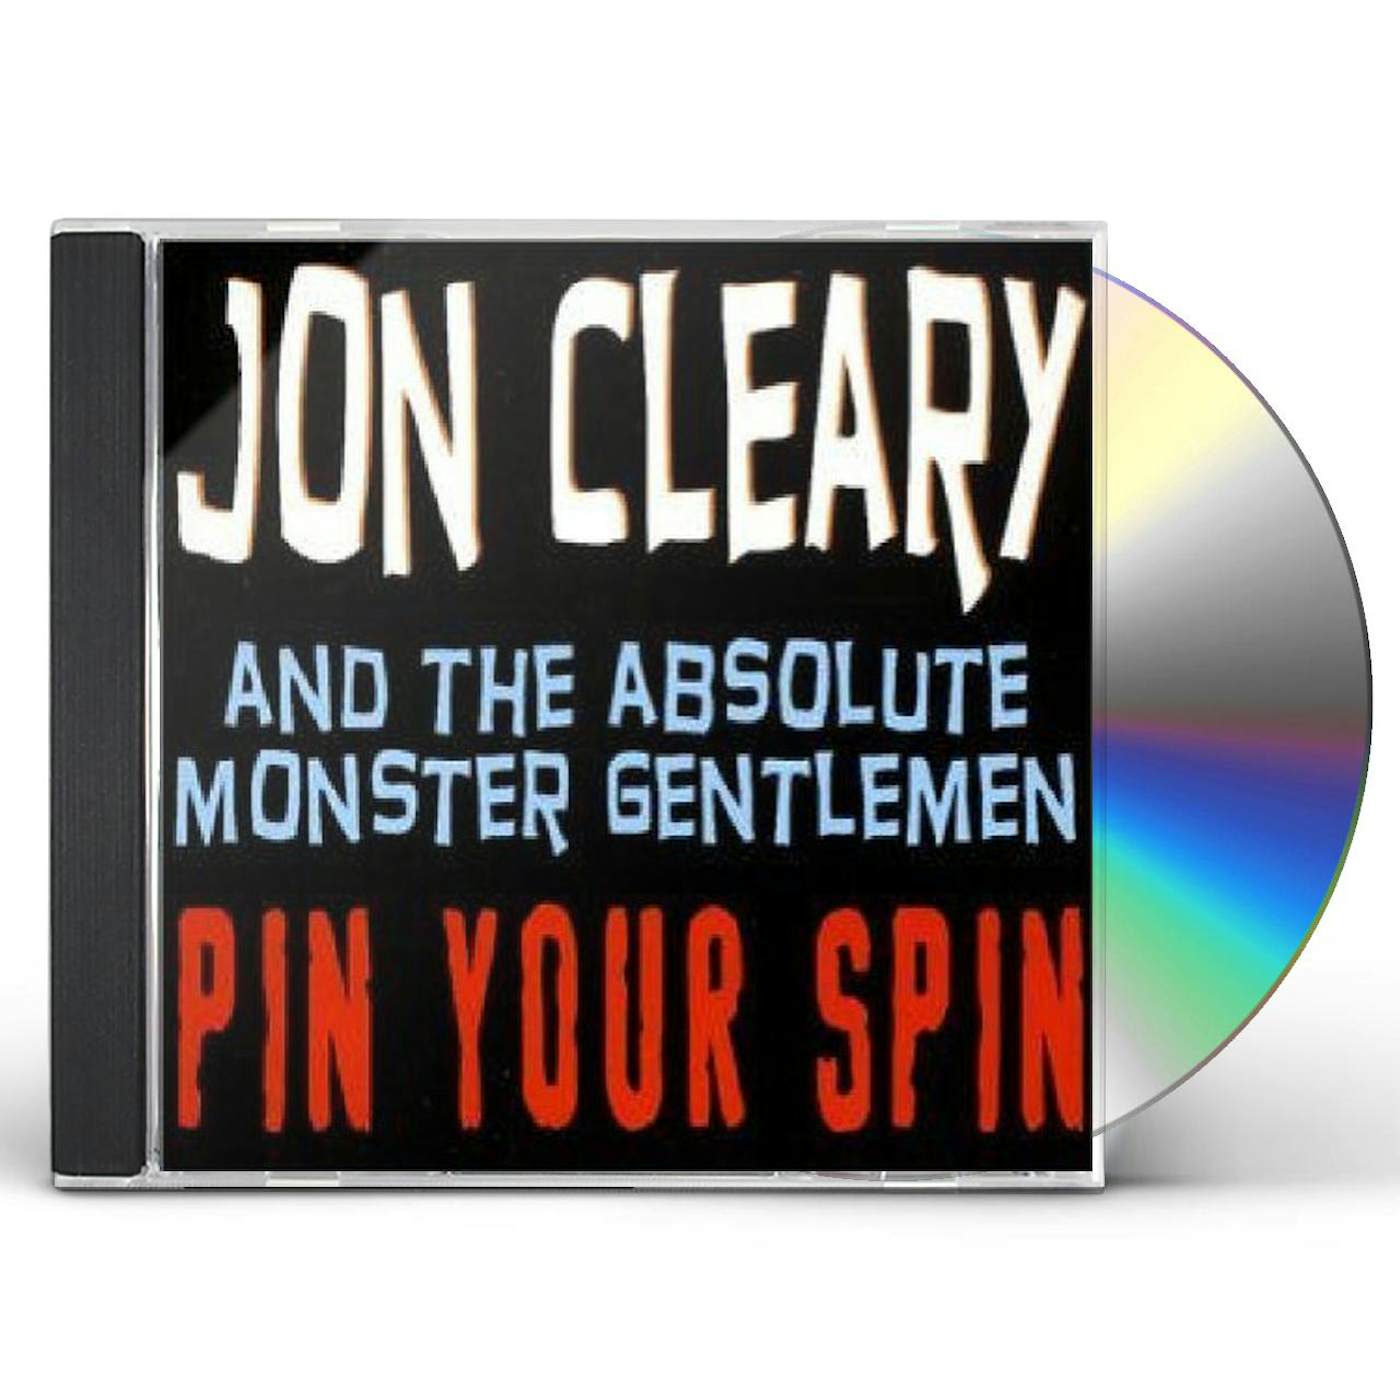 Jon Cleary PIN YOUR SPIN CD